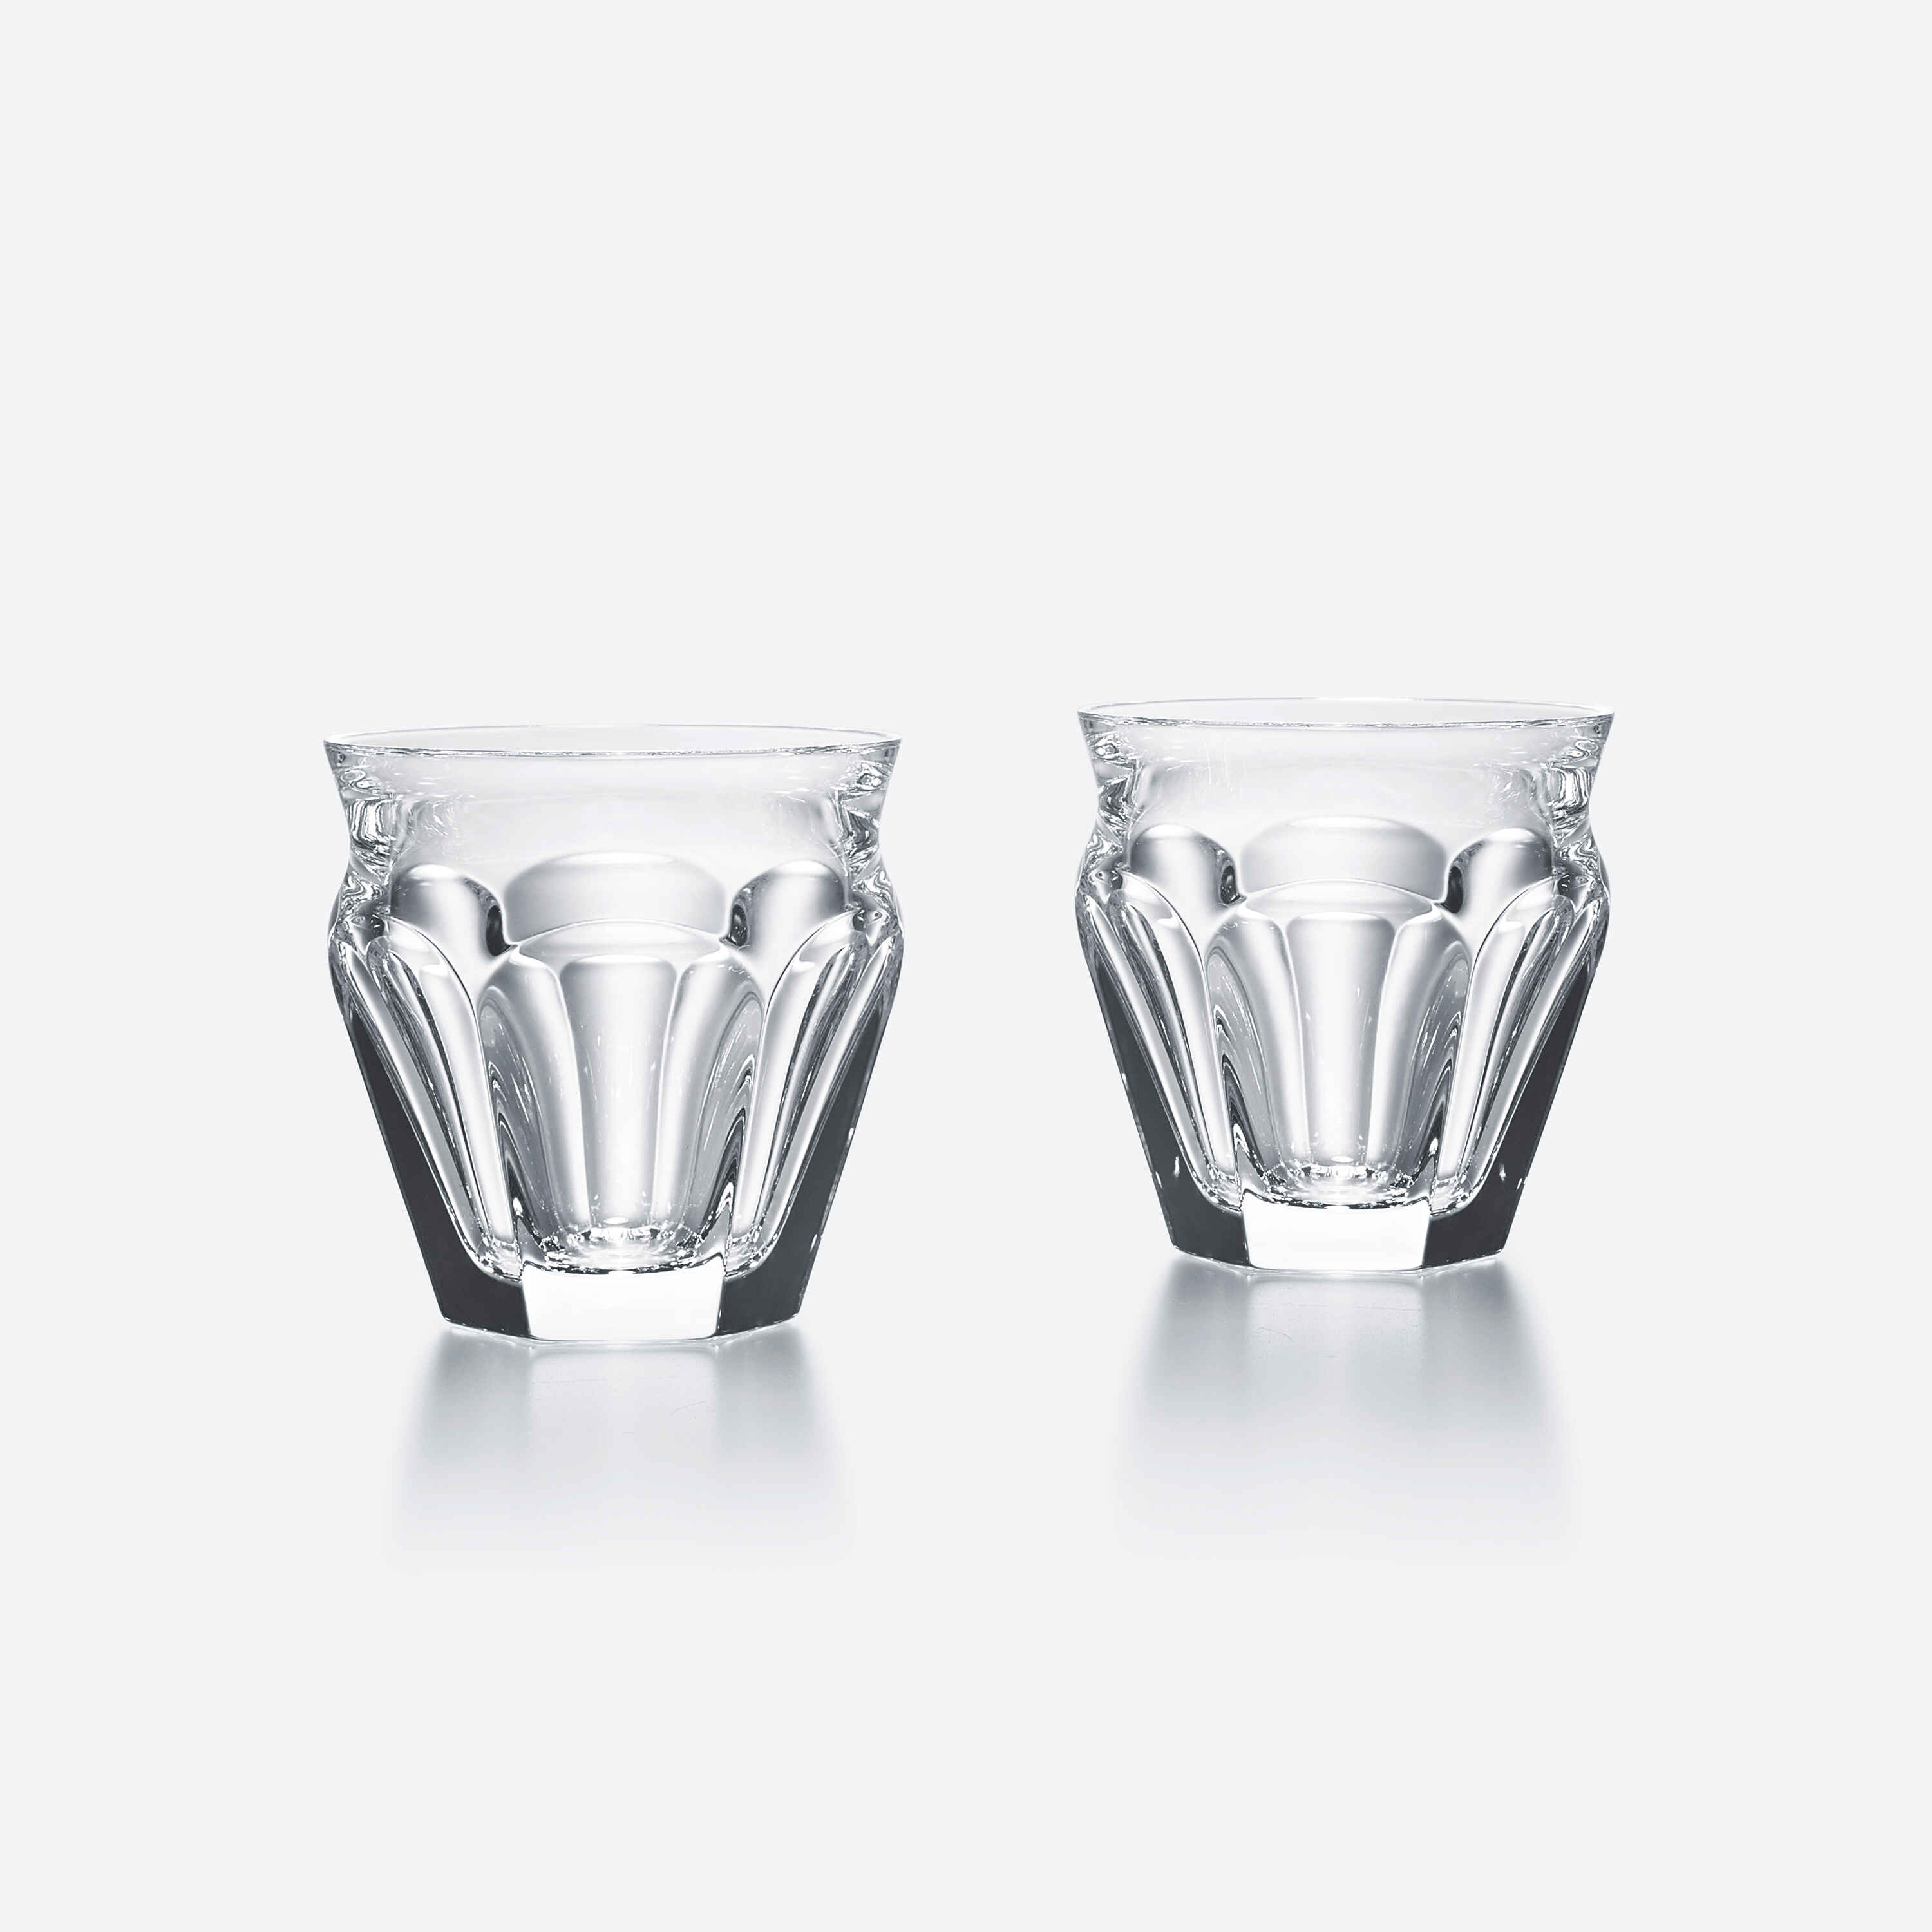 Baccarat Harcourt Talleyrand Cocktail Glasses, Set of 2